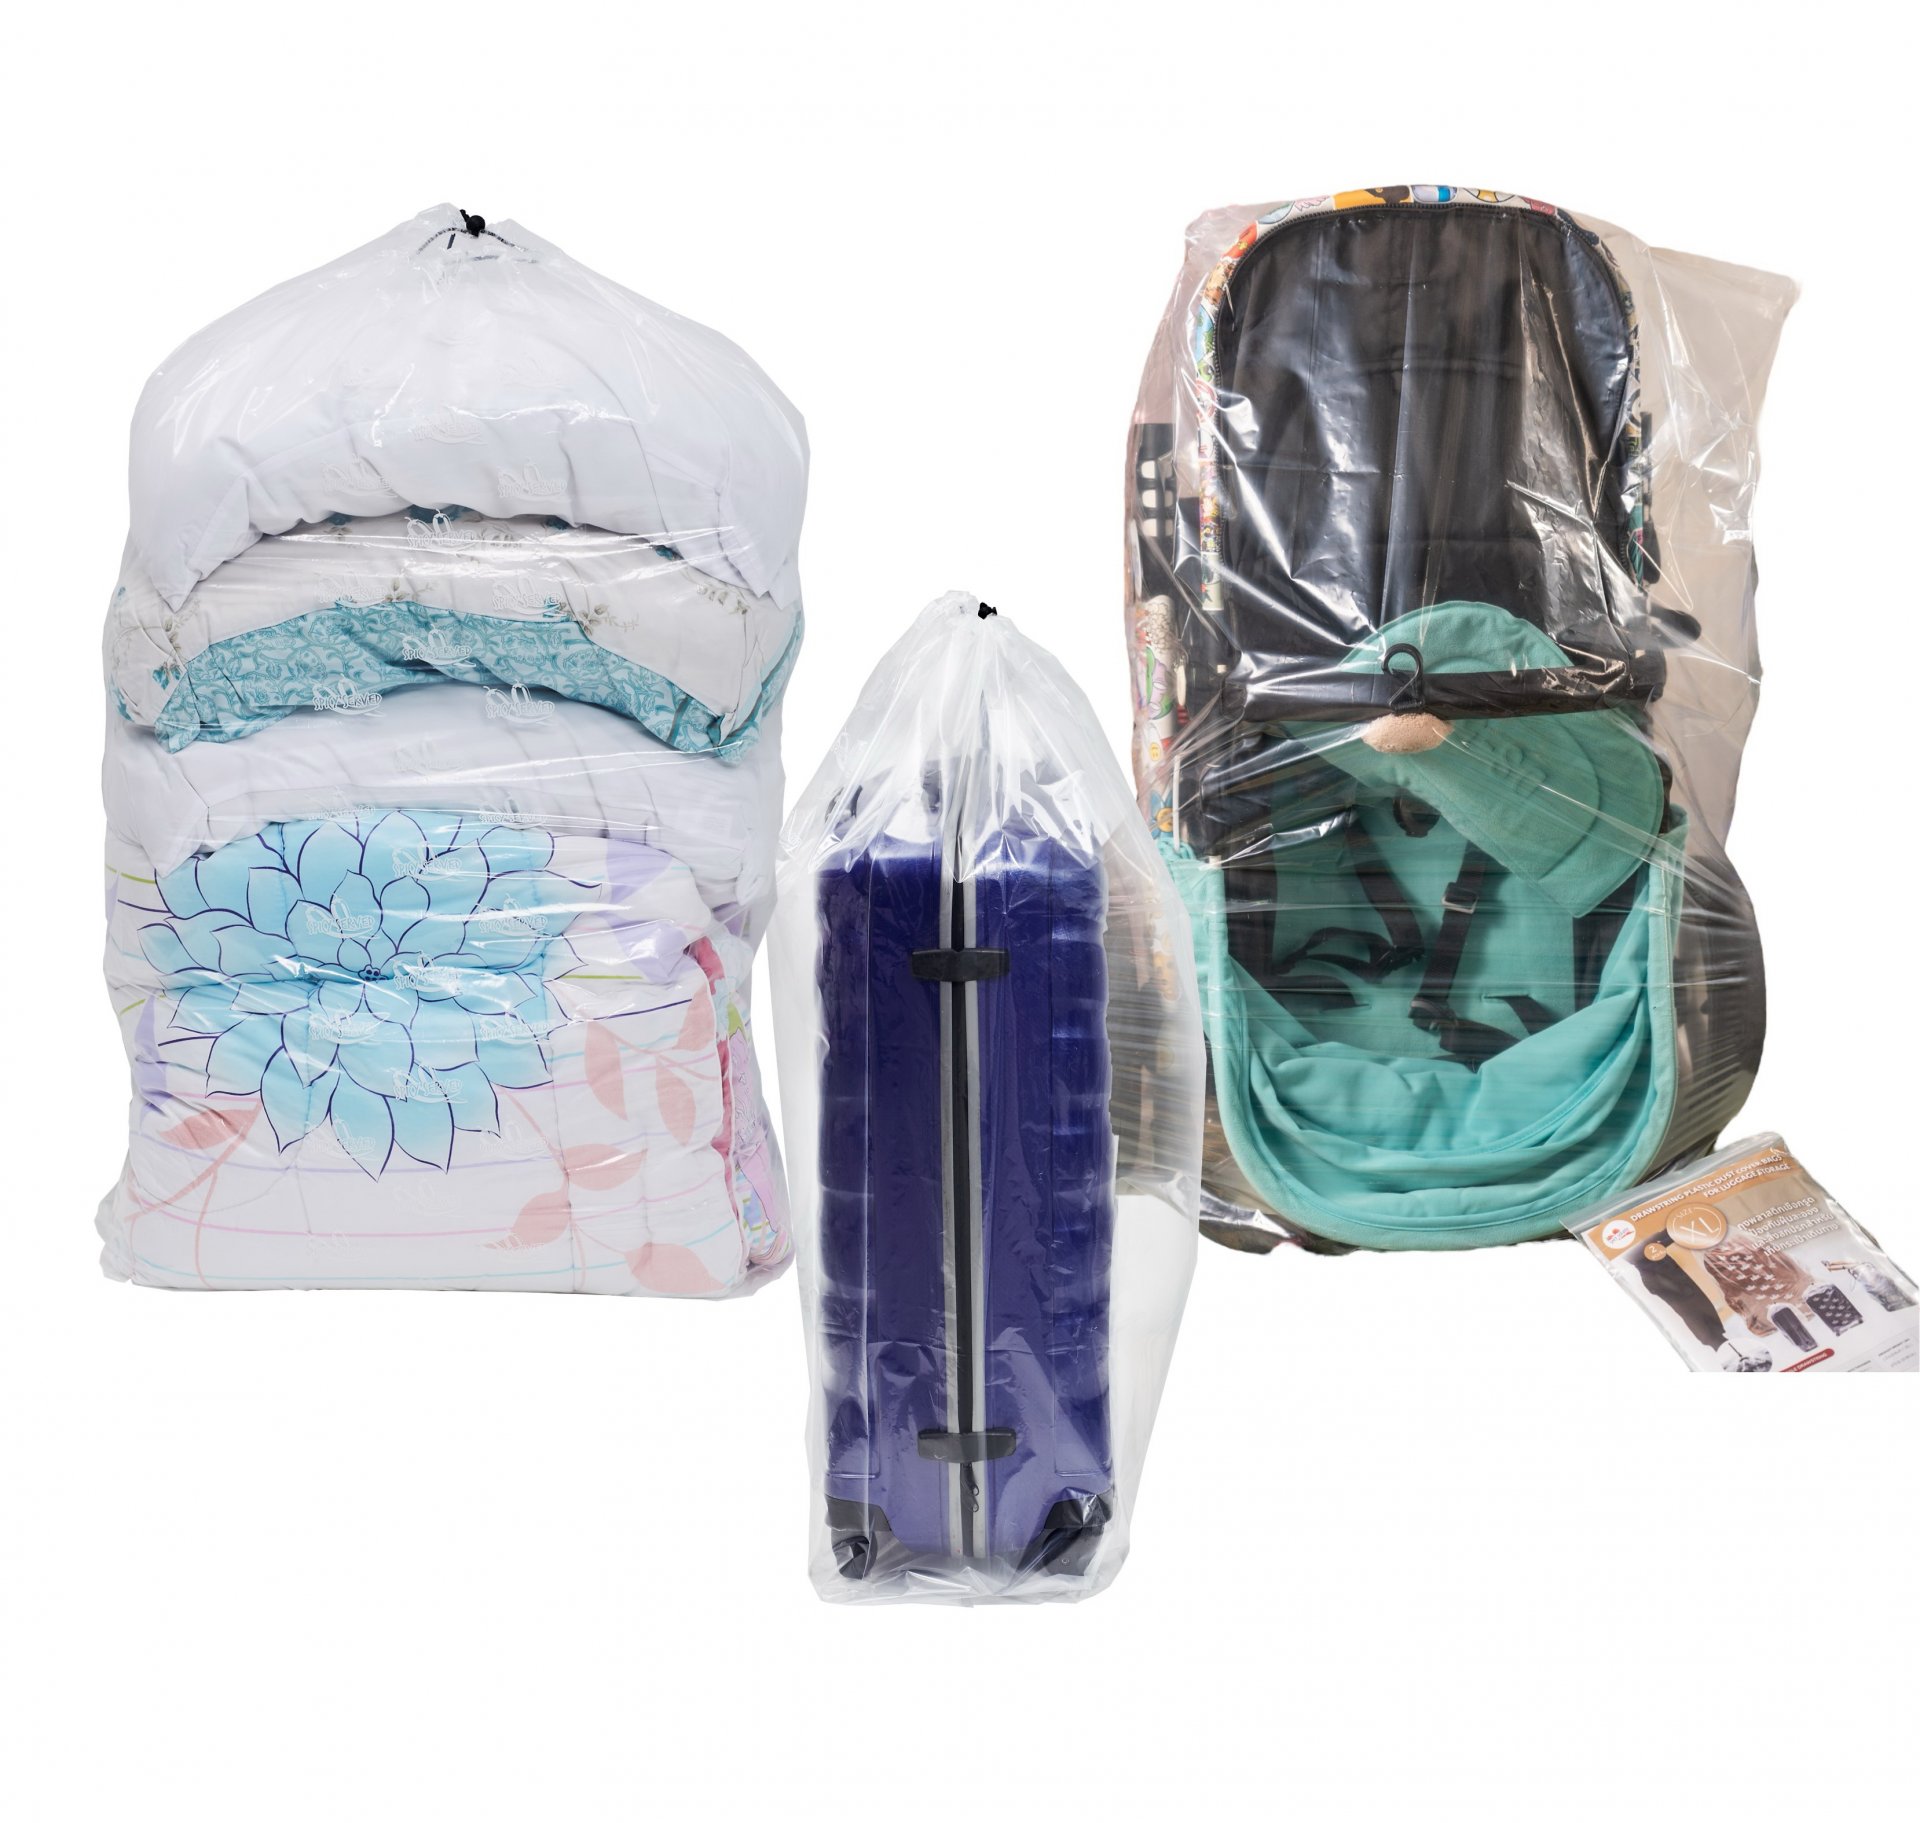 2 PCs/pack (Size XL) Drawstring Plastic Dust Cover Bags,Transparent Storage Bags Suitable for luggage size 30-32 Inches and reusable